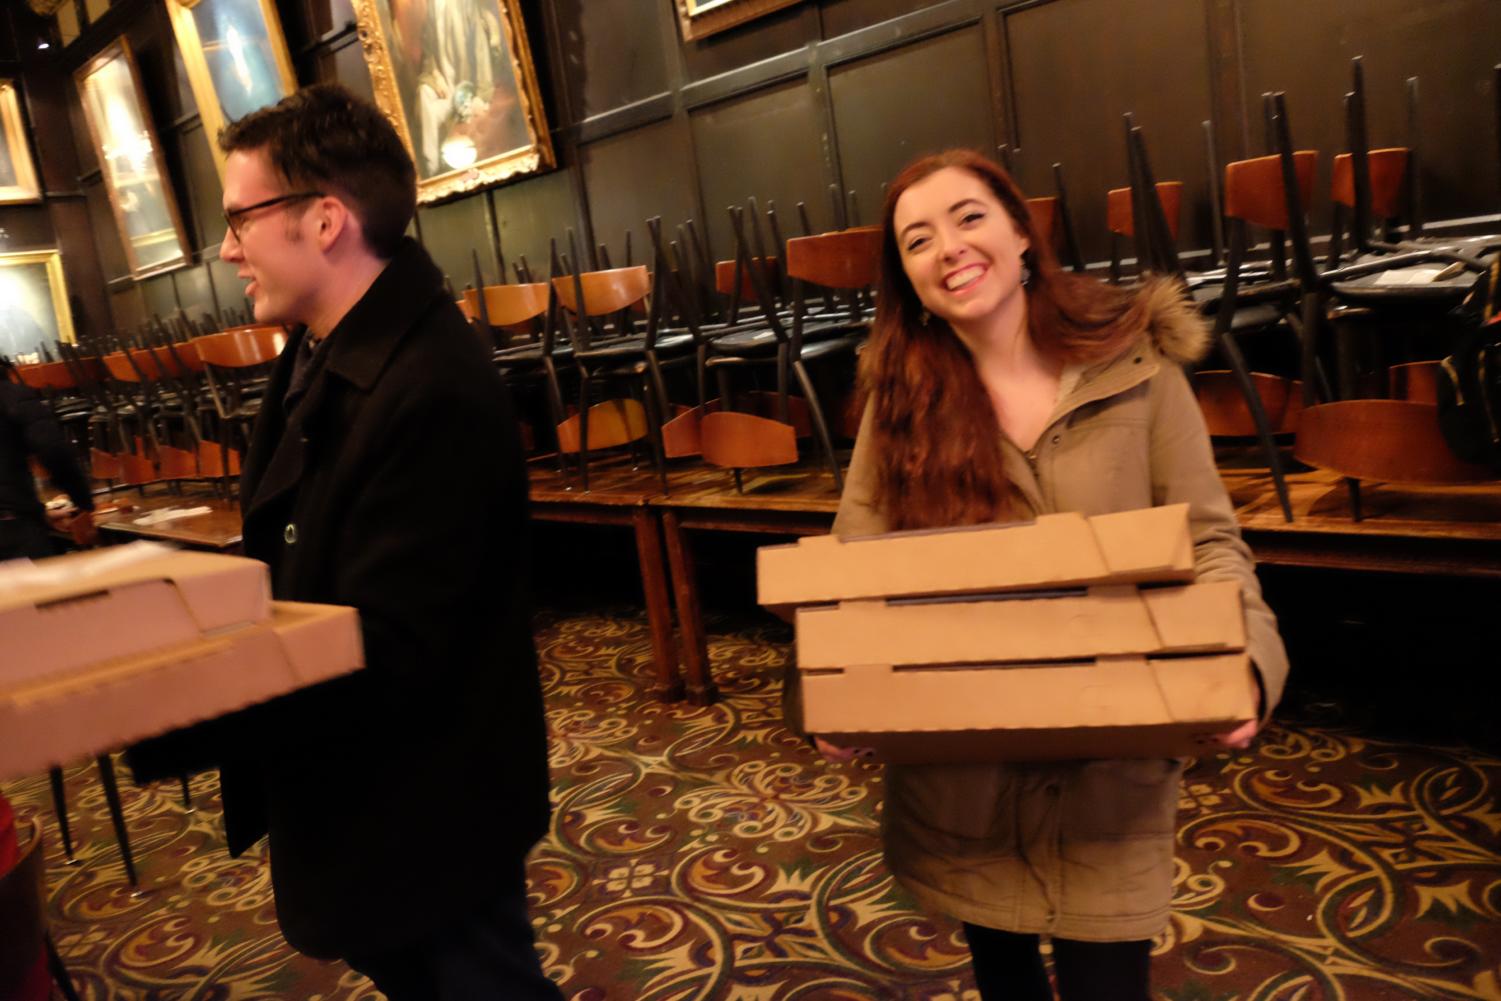 Active Minds and Axis UChicago provided pizza at the event.